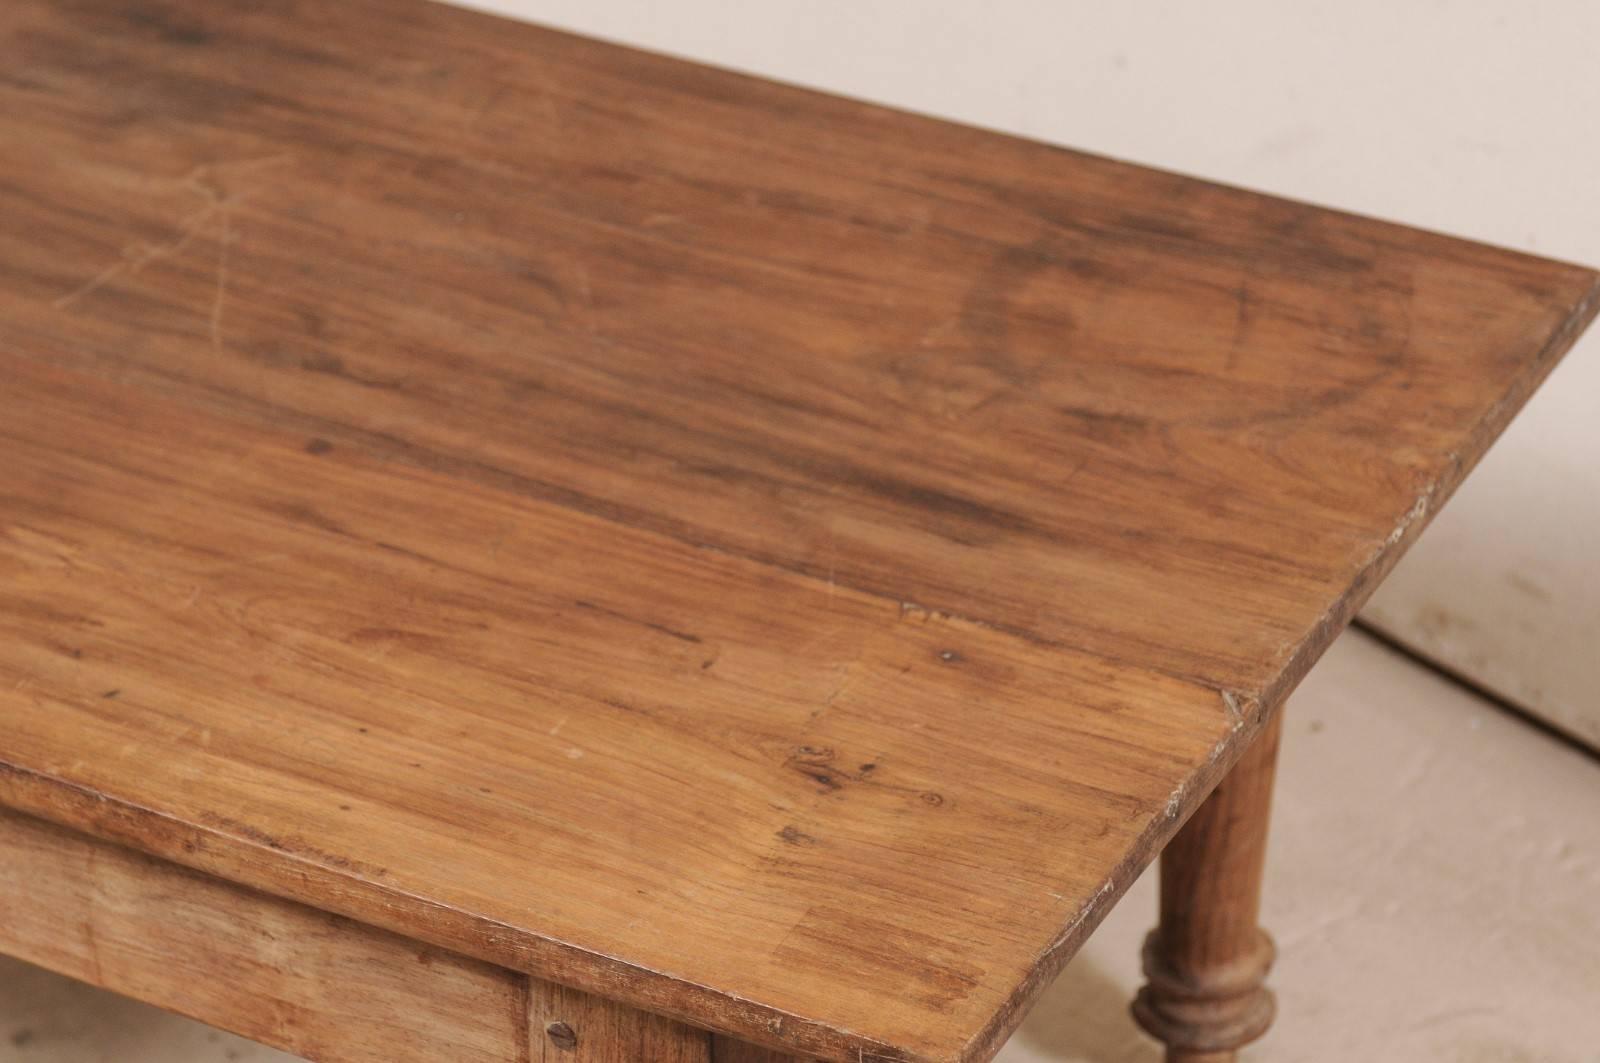 Antique Brazilian Wood Table or Bench from the Early 20th Century 2